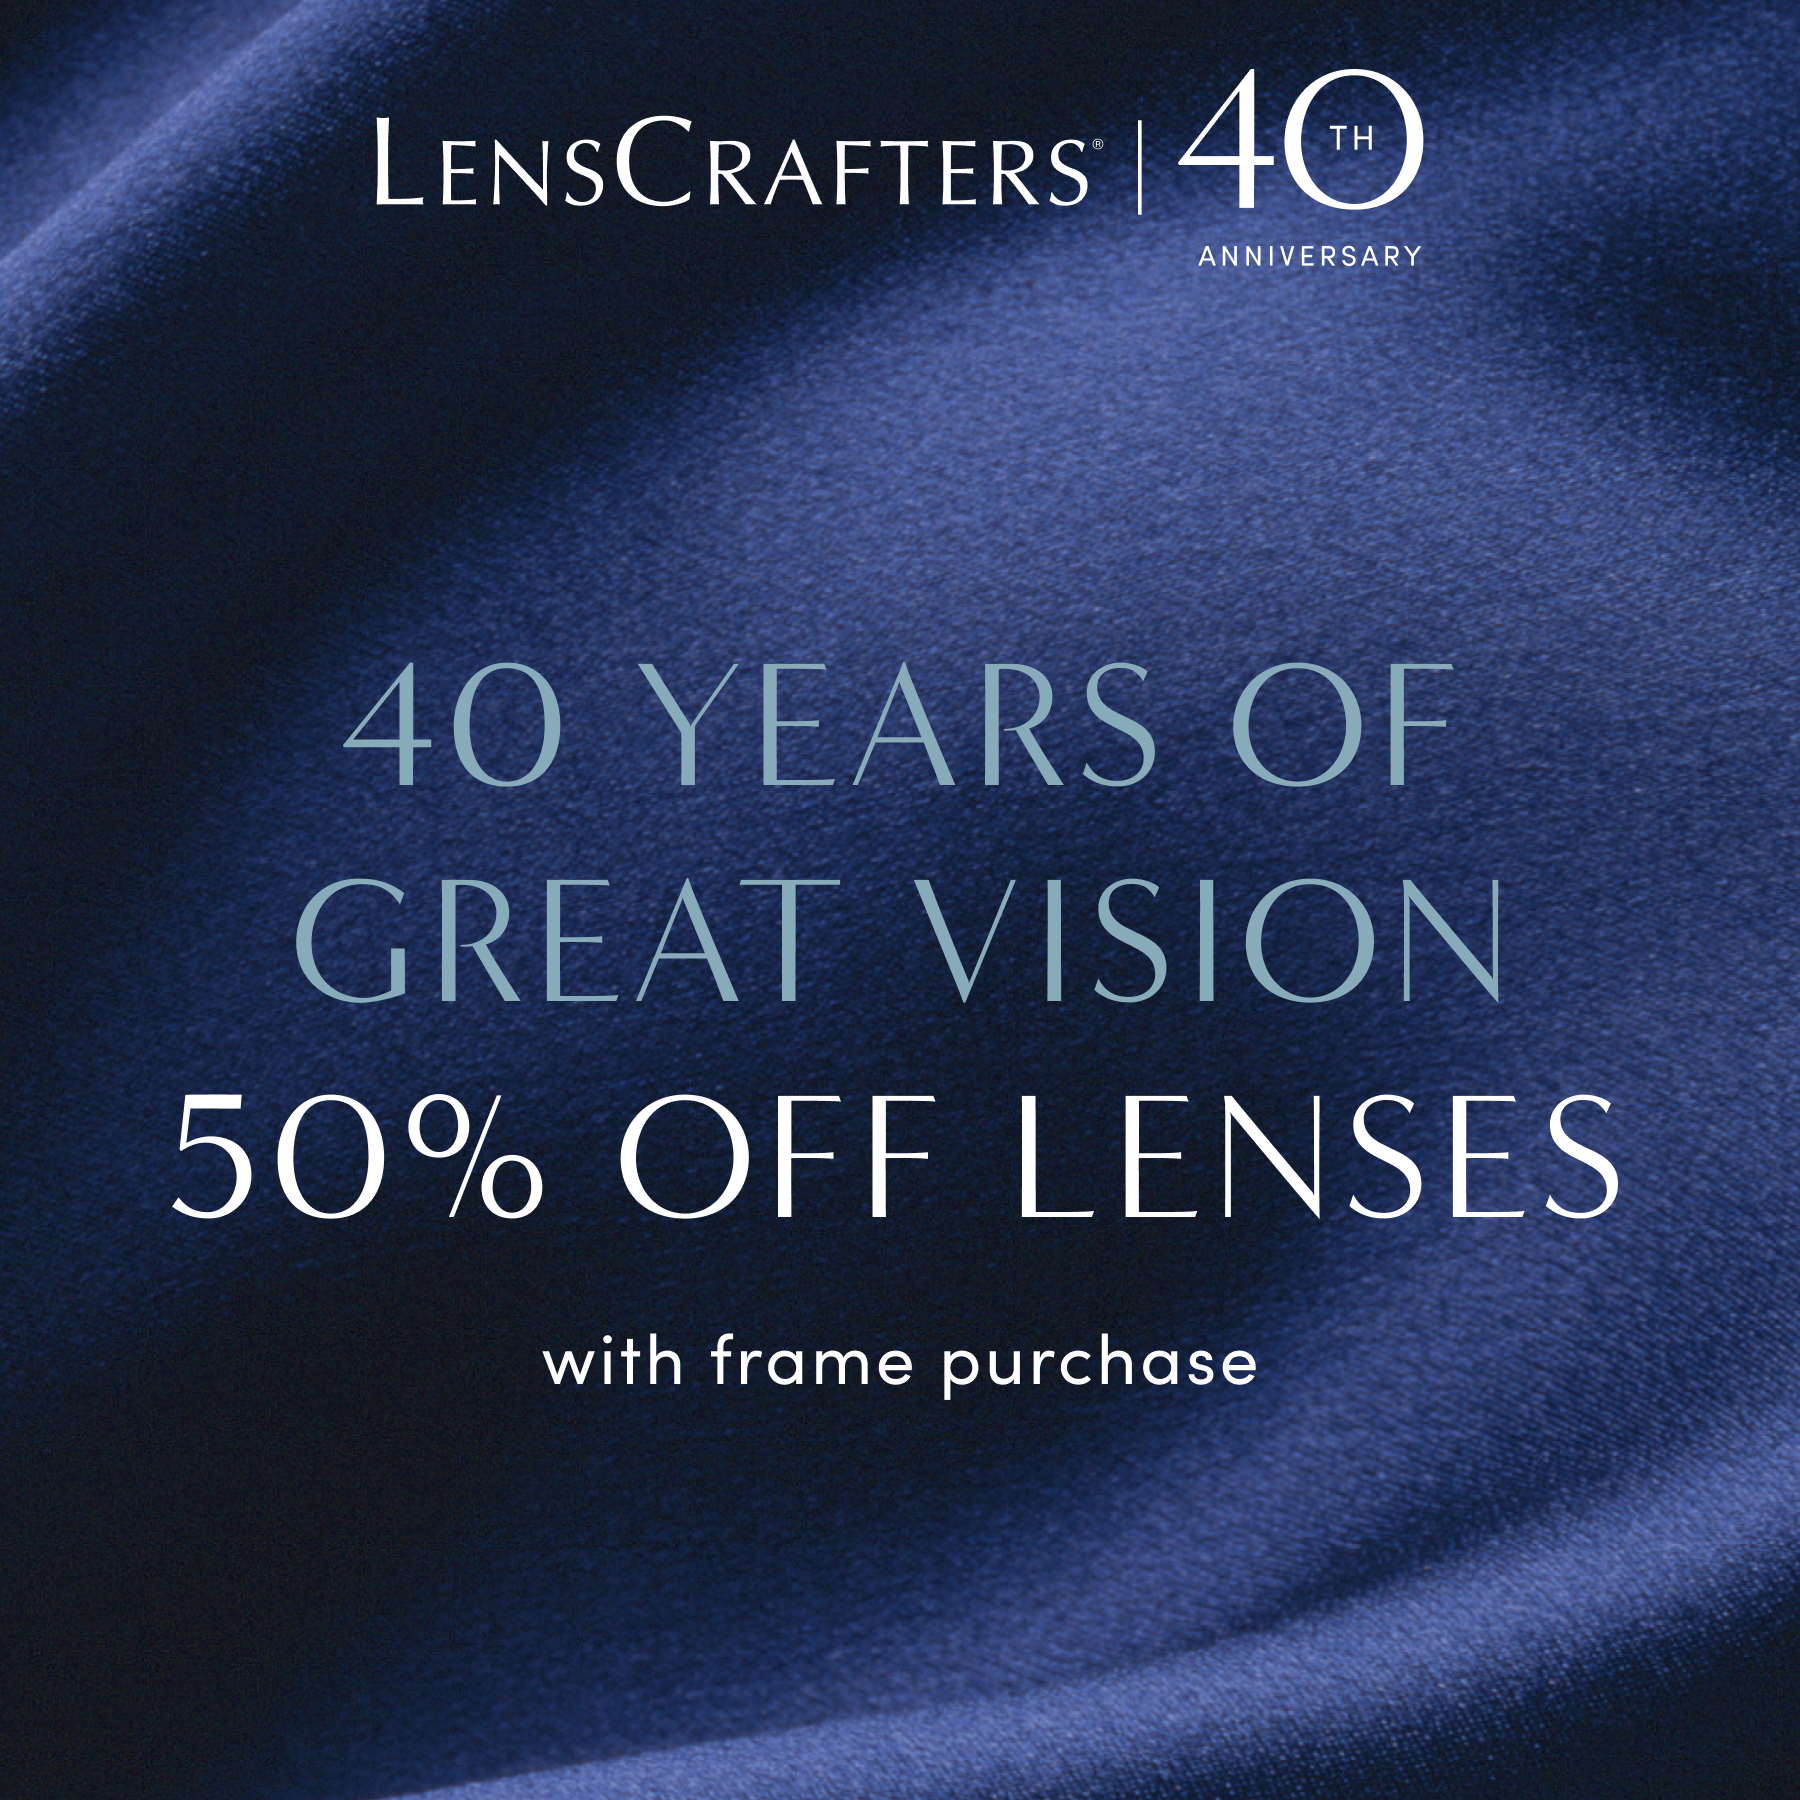 lenscrafters 50% off lenses with frame purchase